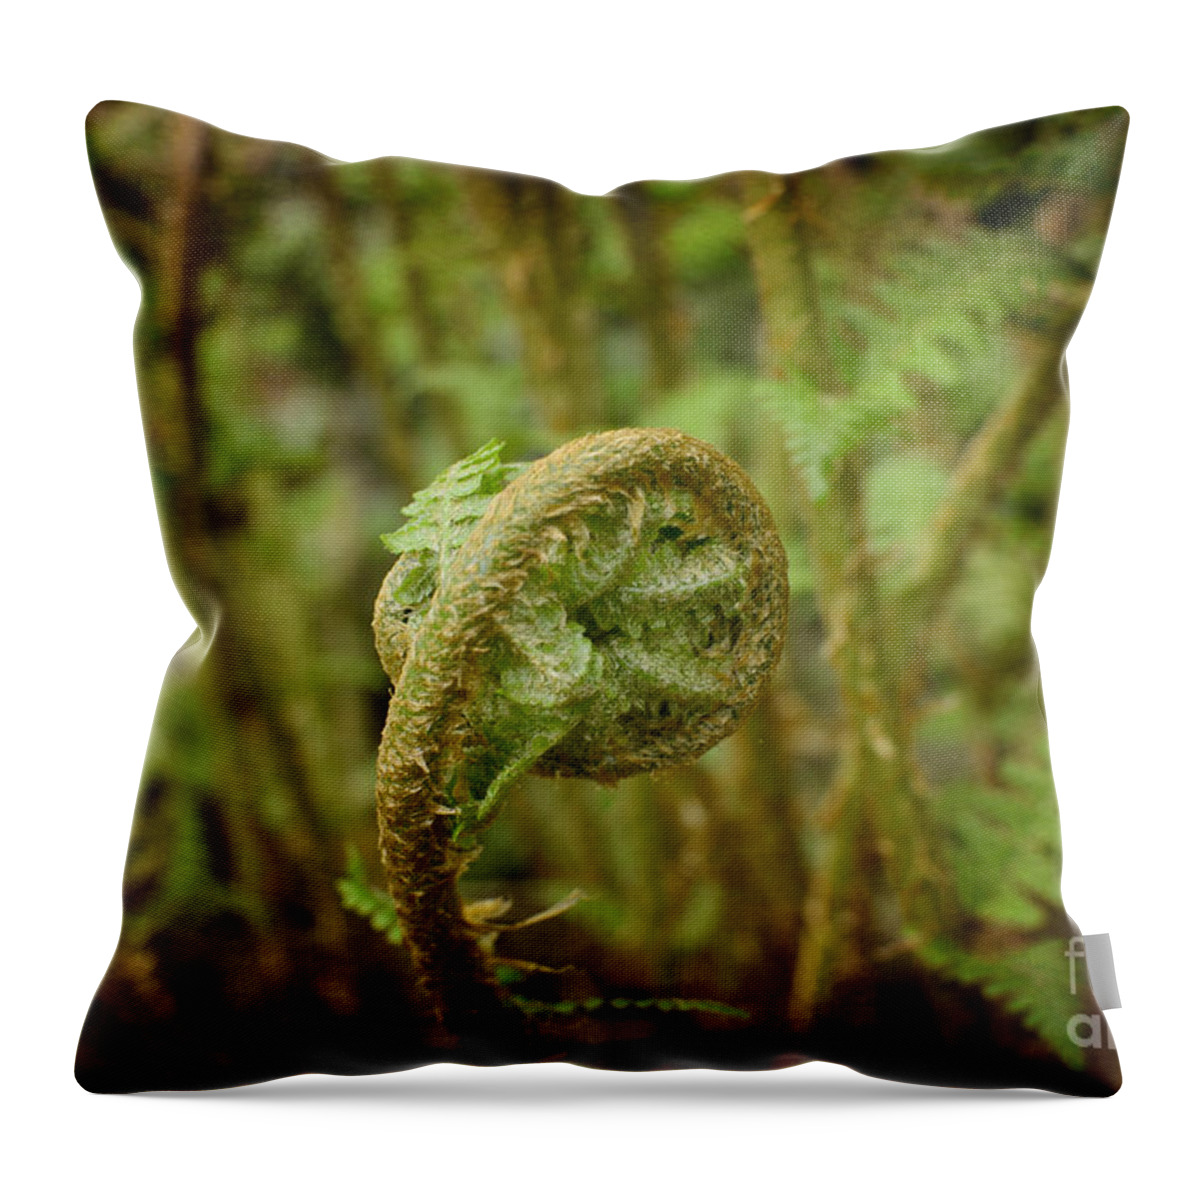  Throw Pillow featuring the photograph Unfurling Fern in the Garden by Maria Janicki